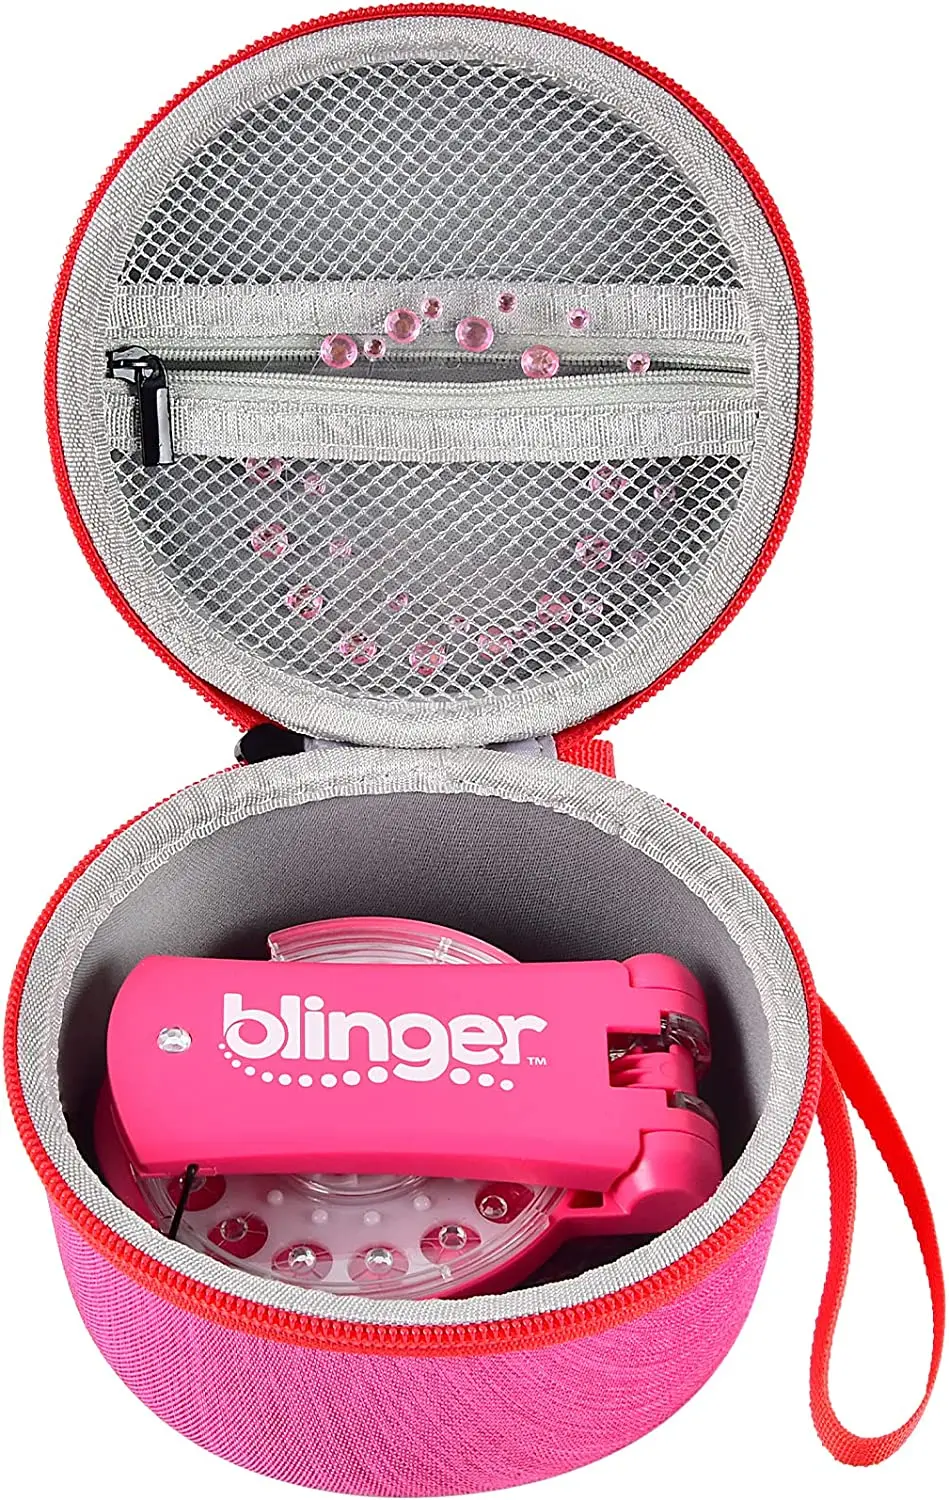 180 Gems Kit Blingers Deluxe Set Blinger Hair Gems Decoration Deluxe Set,  Glam Collection, Comes with Glam Styling Tool for Girl